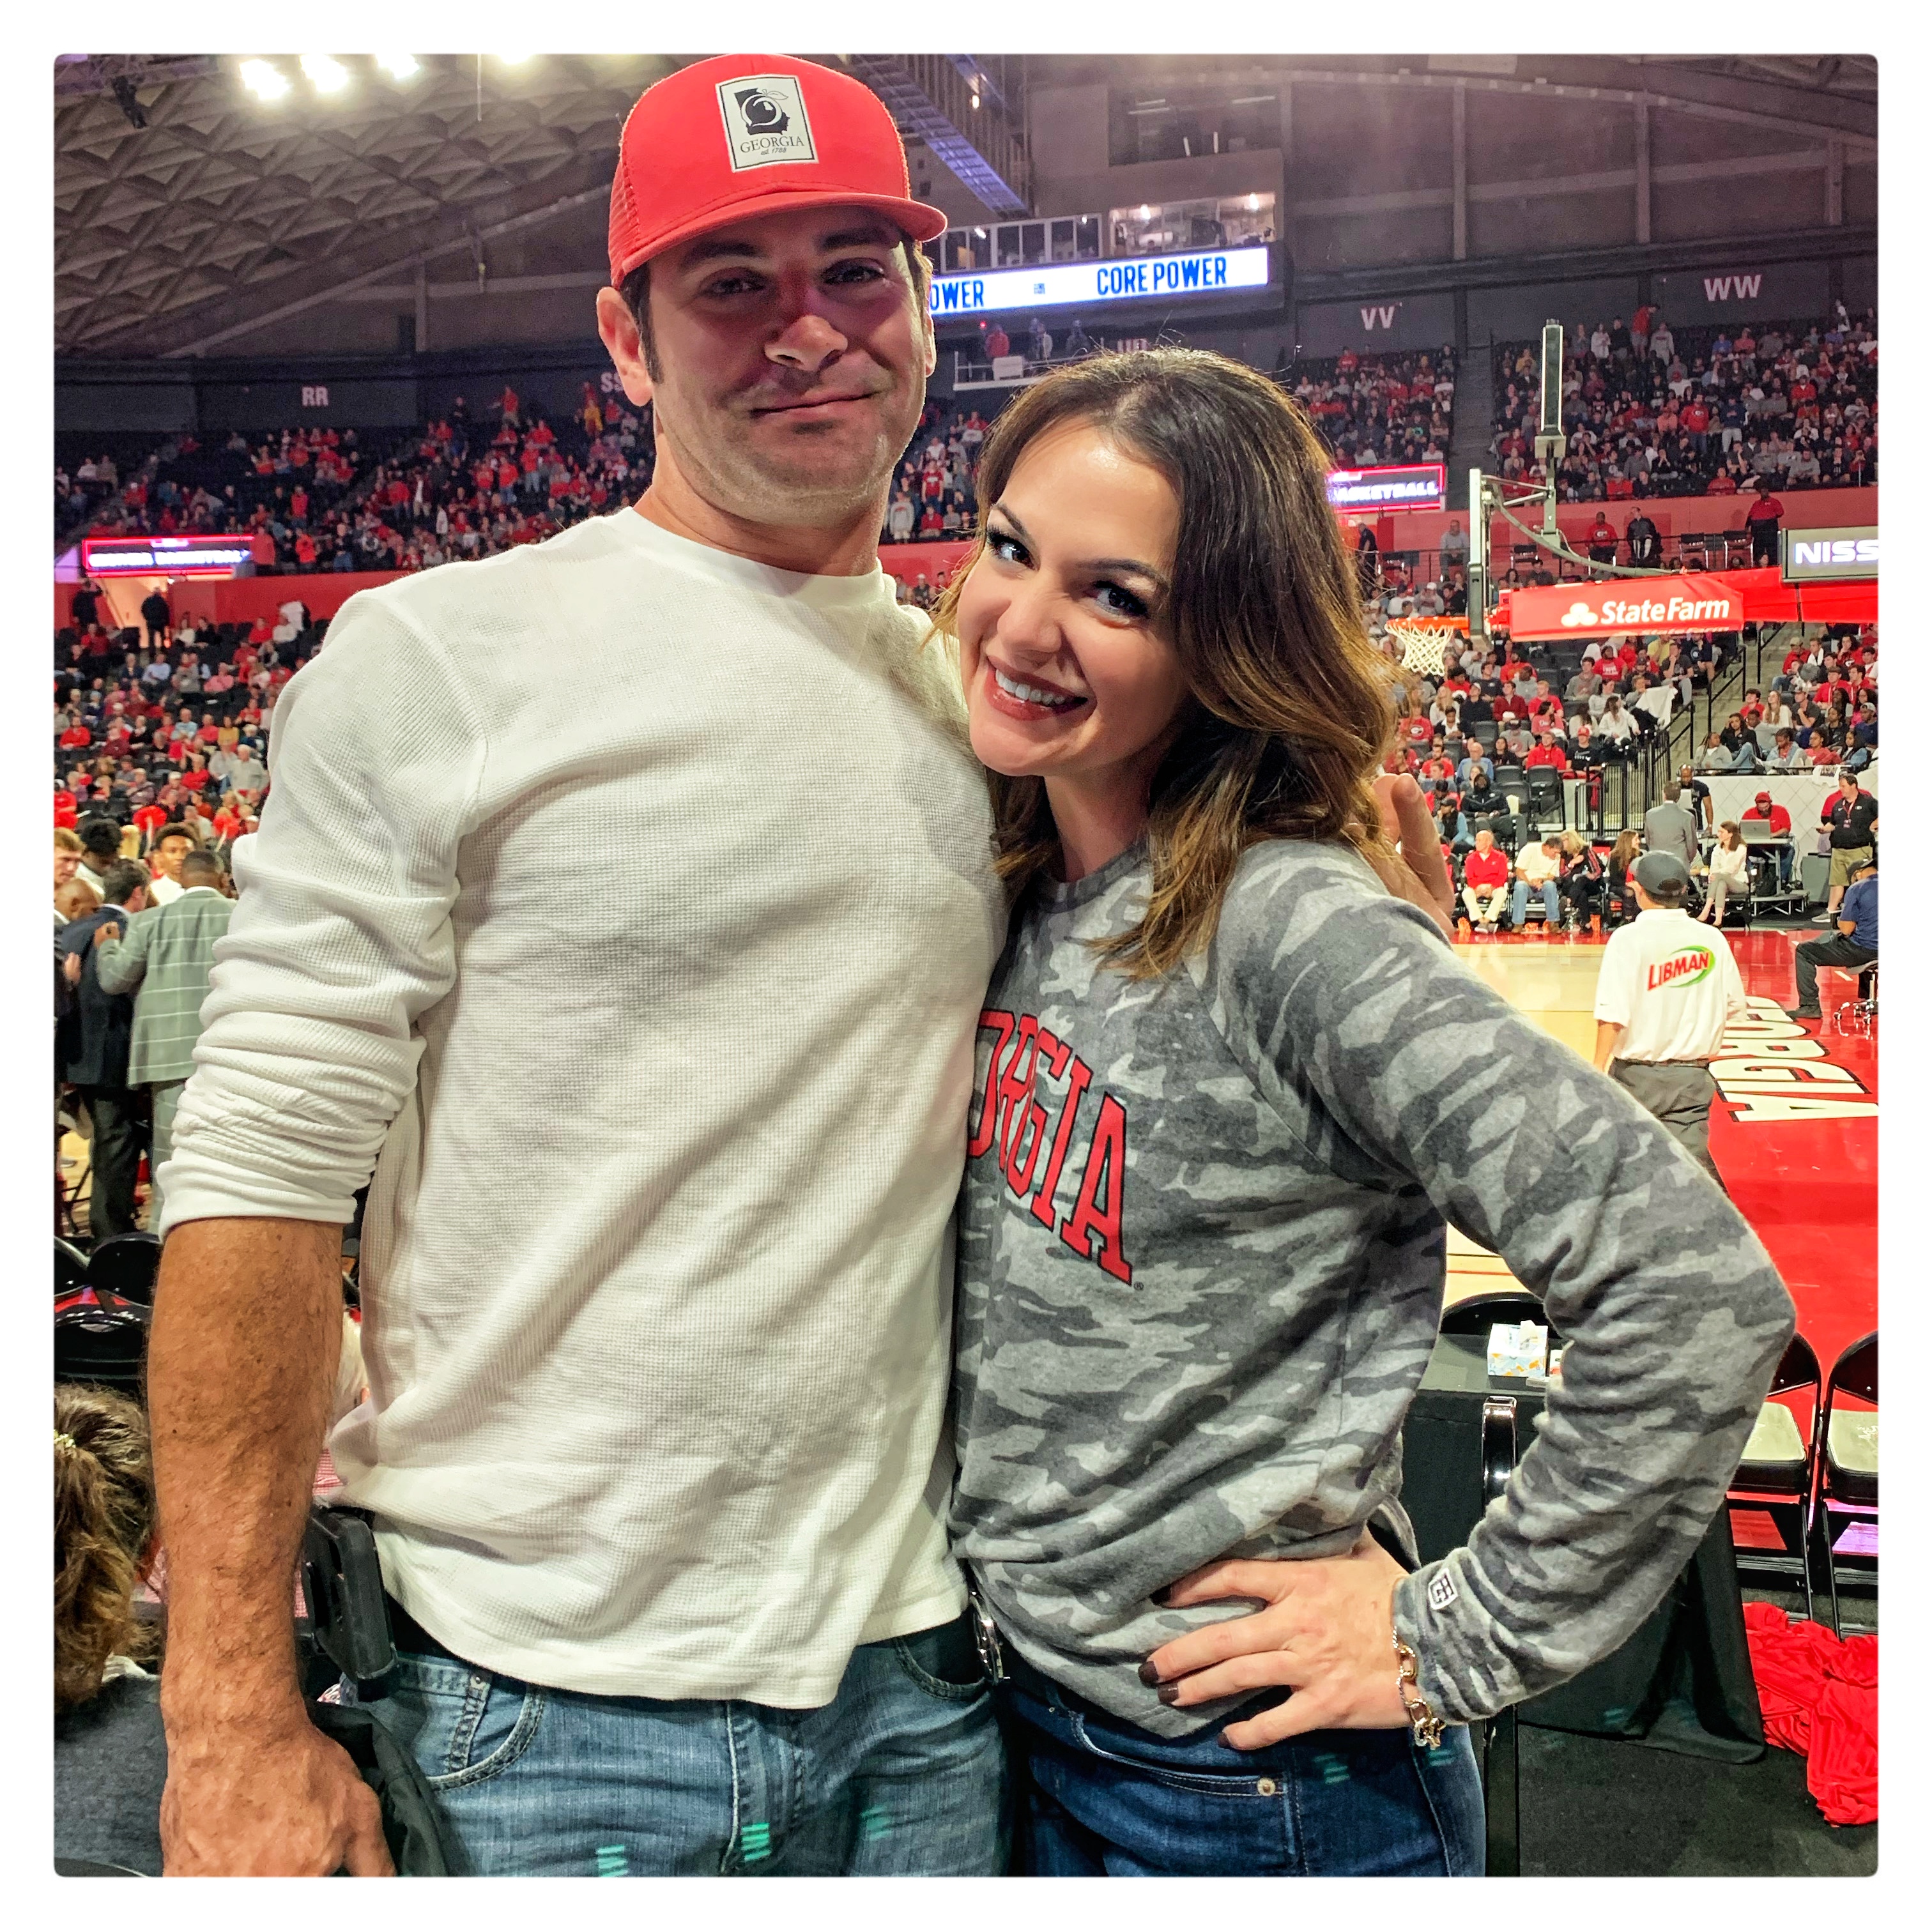 Stephanie with a friend at a UGA basketball game